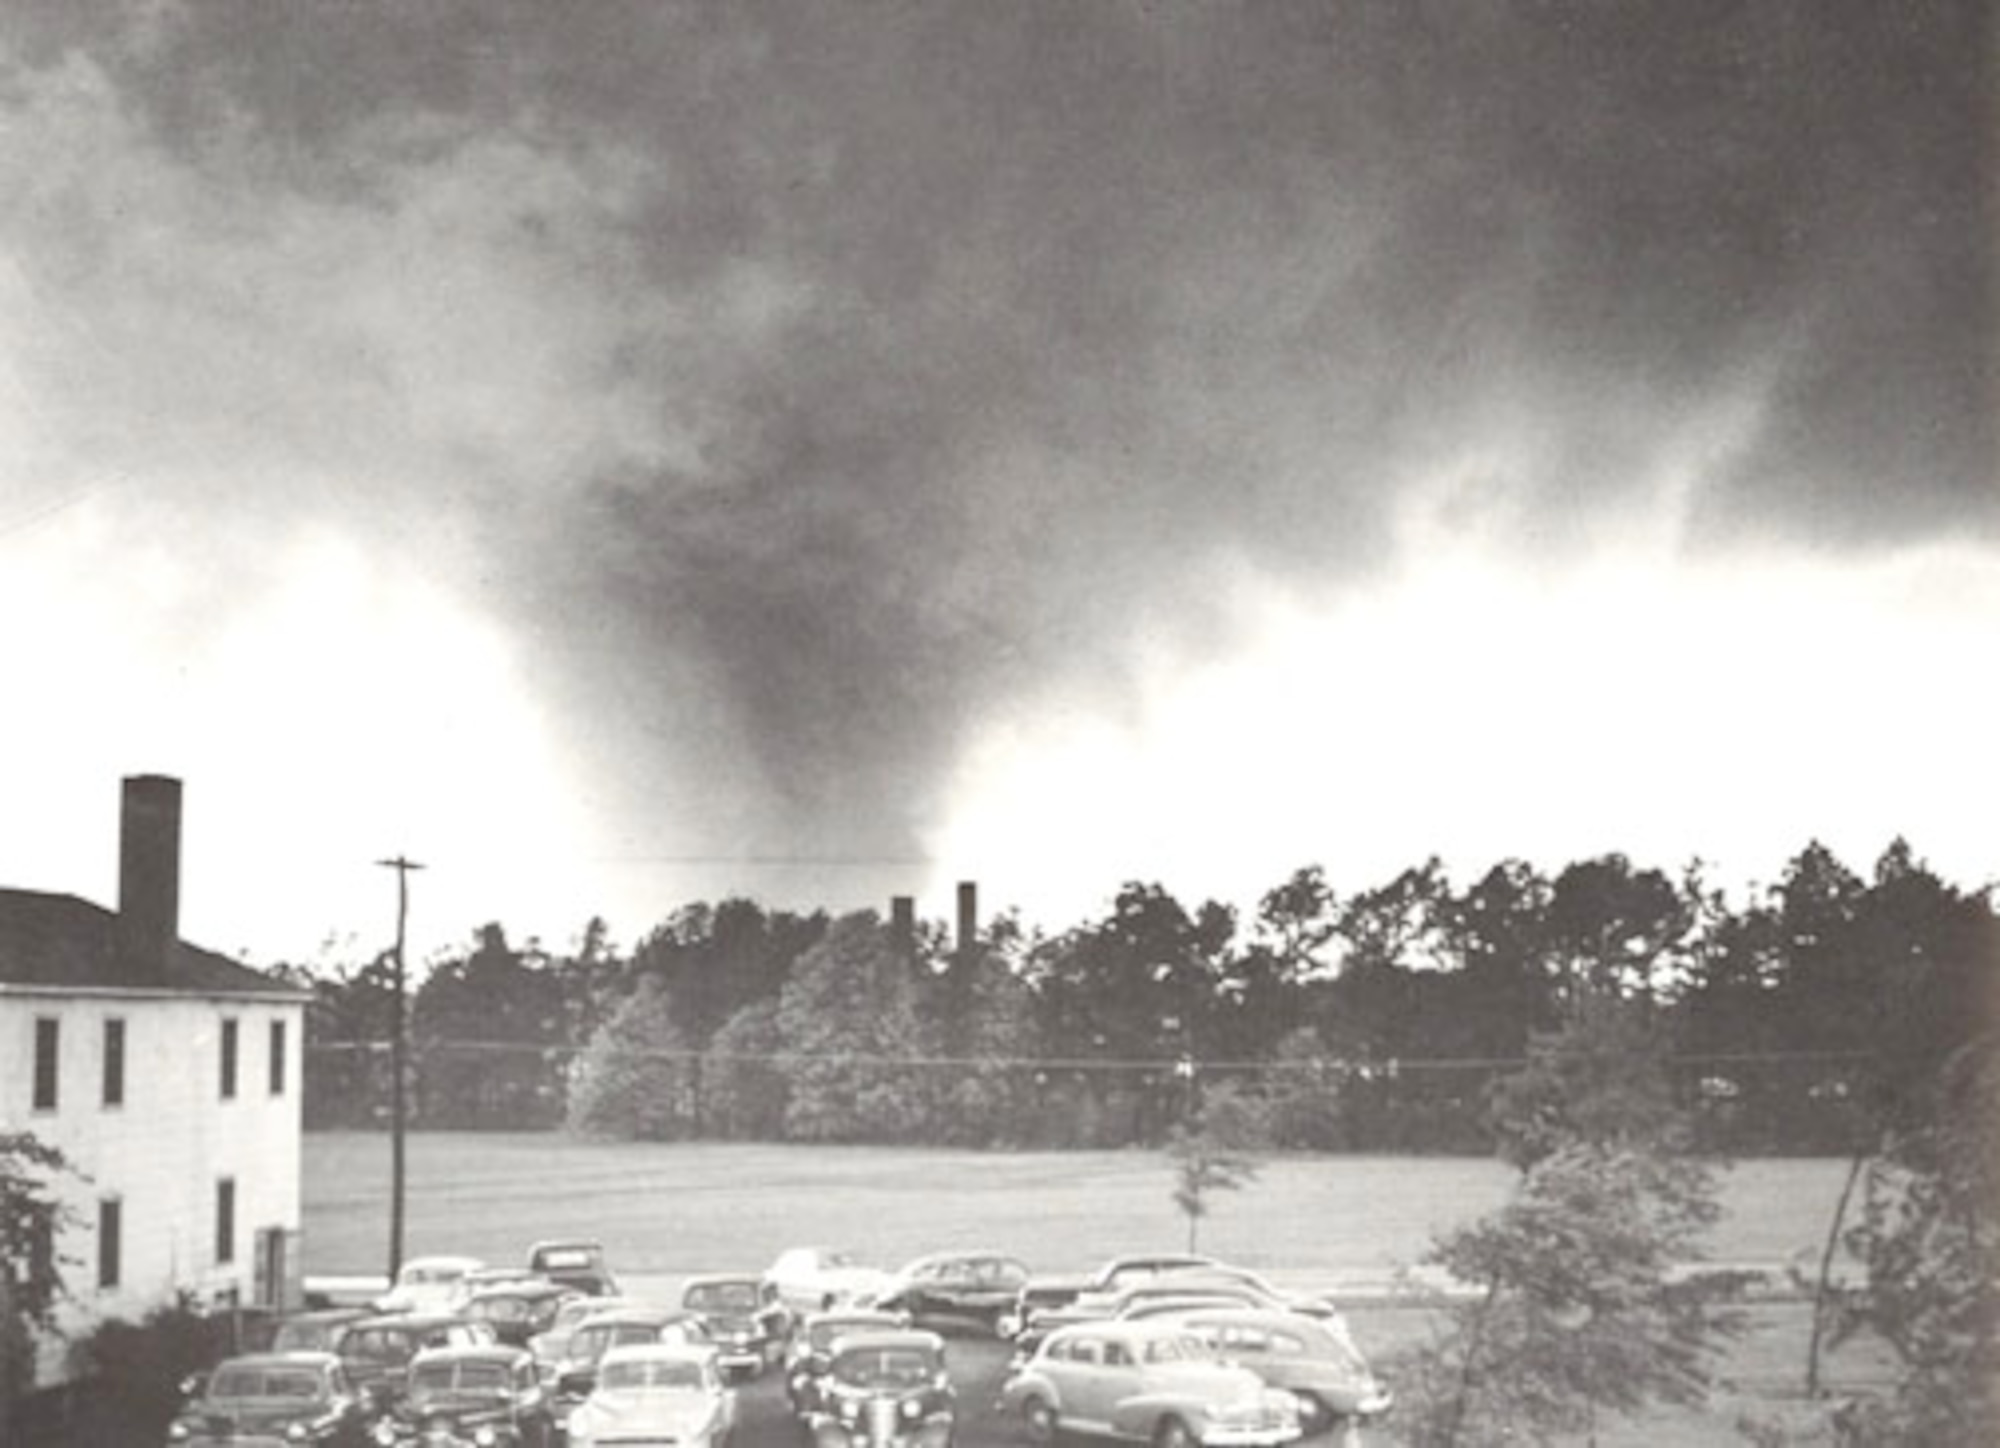 April 30 marks the 60th anniversary of the worst natural disaster to ever hit Robins Air Force Base. (Courtesy photo)